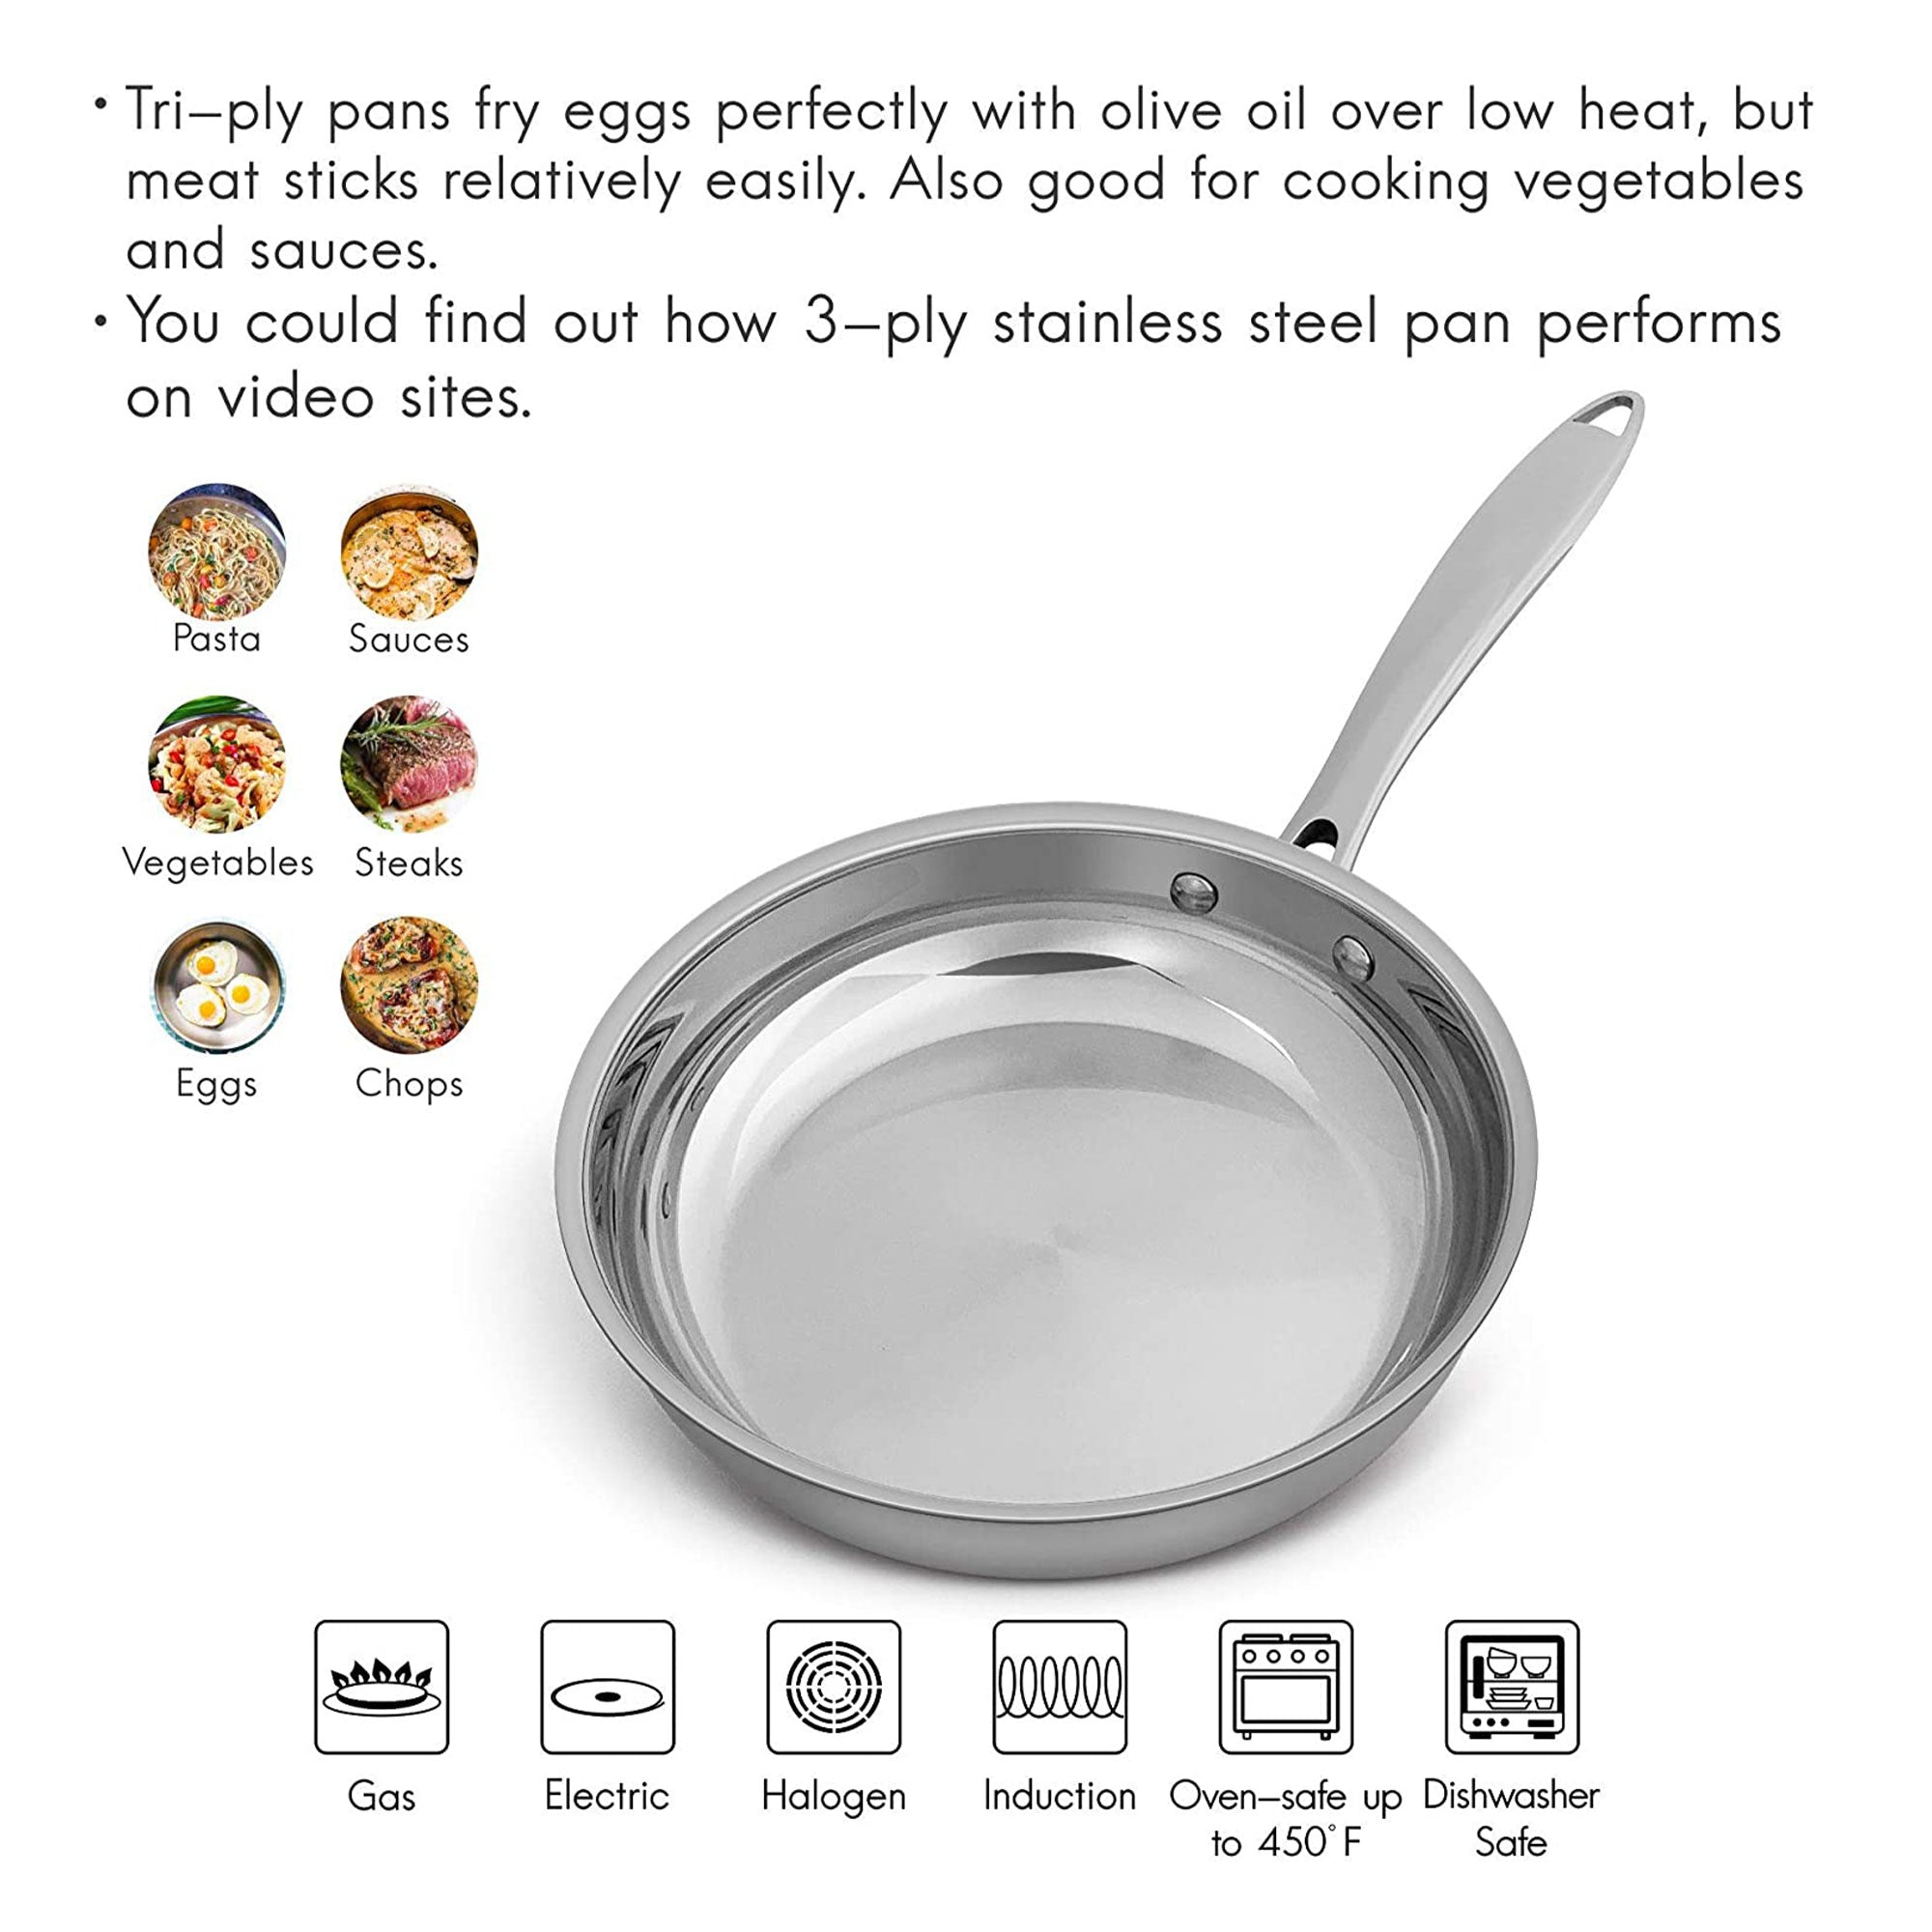 Fortune Candy 8-Inch Fry Pan with Lid, 3-ply Skillet, 18/8 Stainless Steel, Dishwasher Safe, Induction Ready, Silver (Mirror Finish)